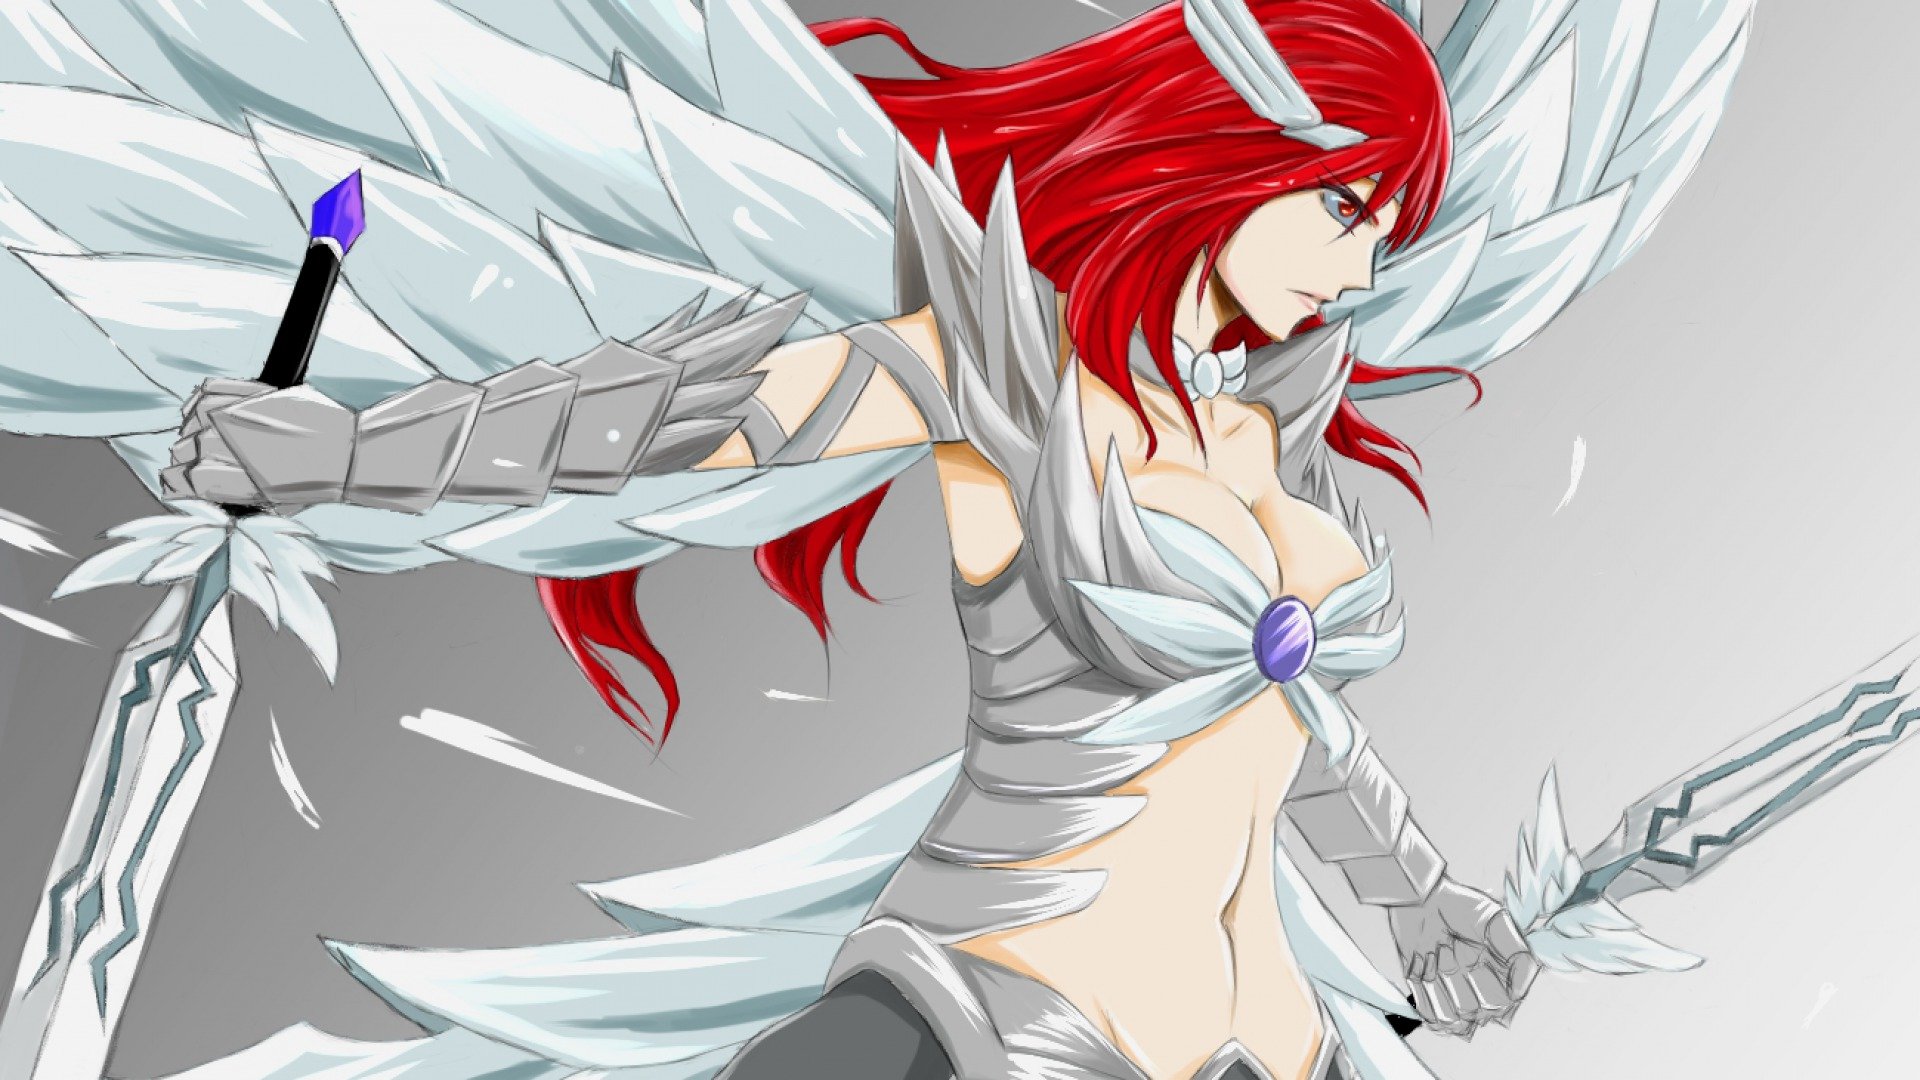 Download full hd 1920x1080 Erza Scarlet computer wallpaper ID:40865 for free